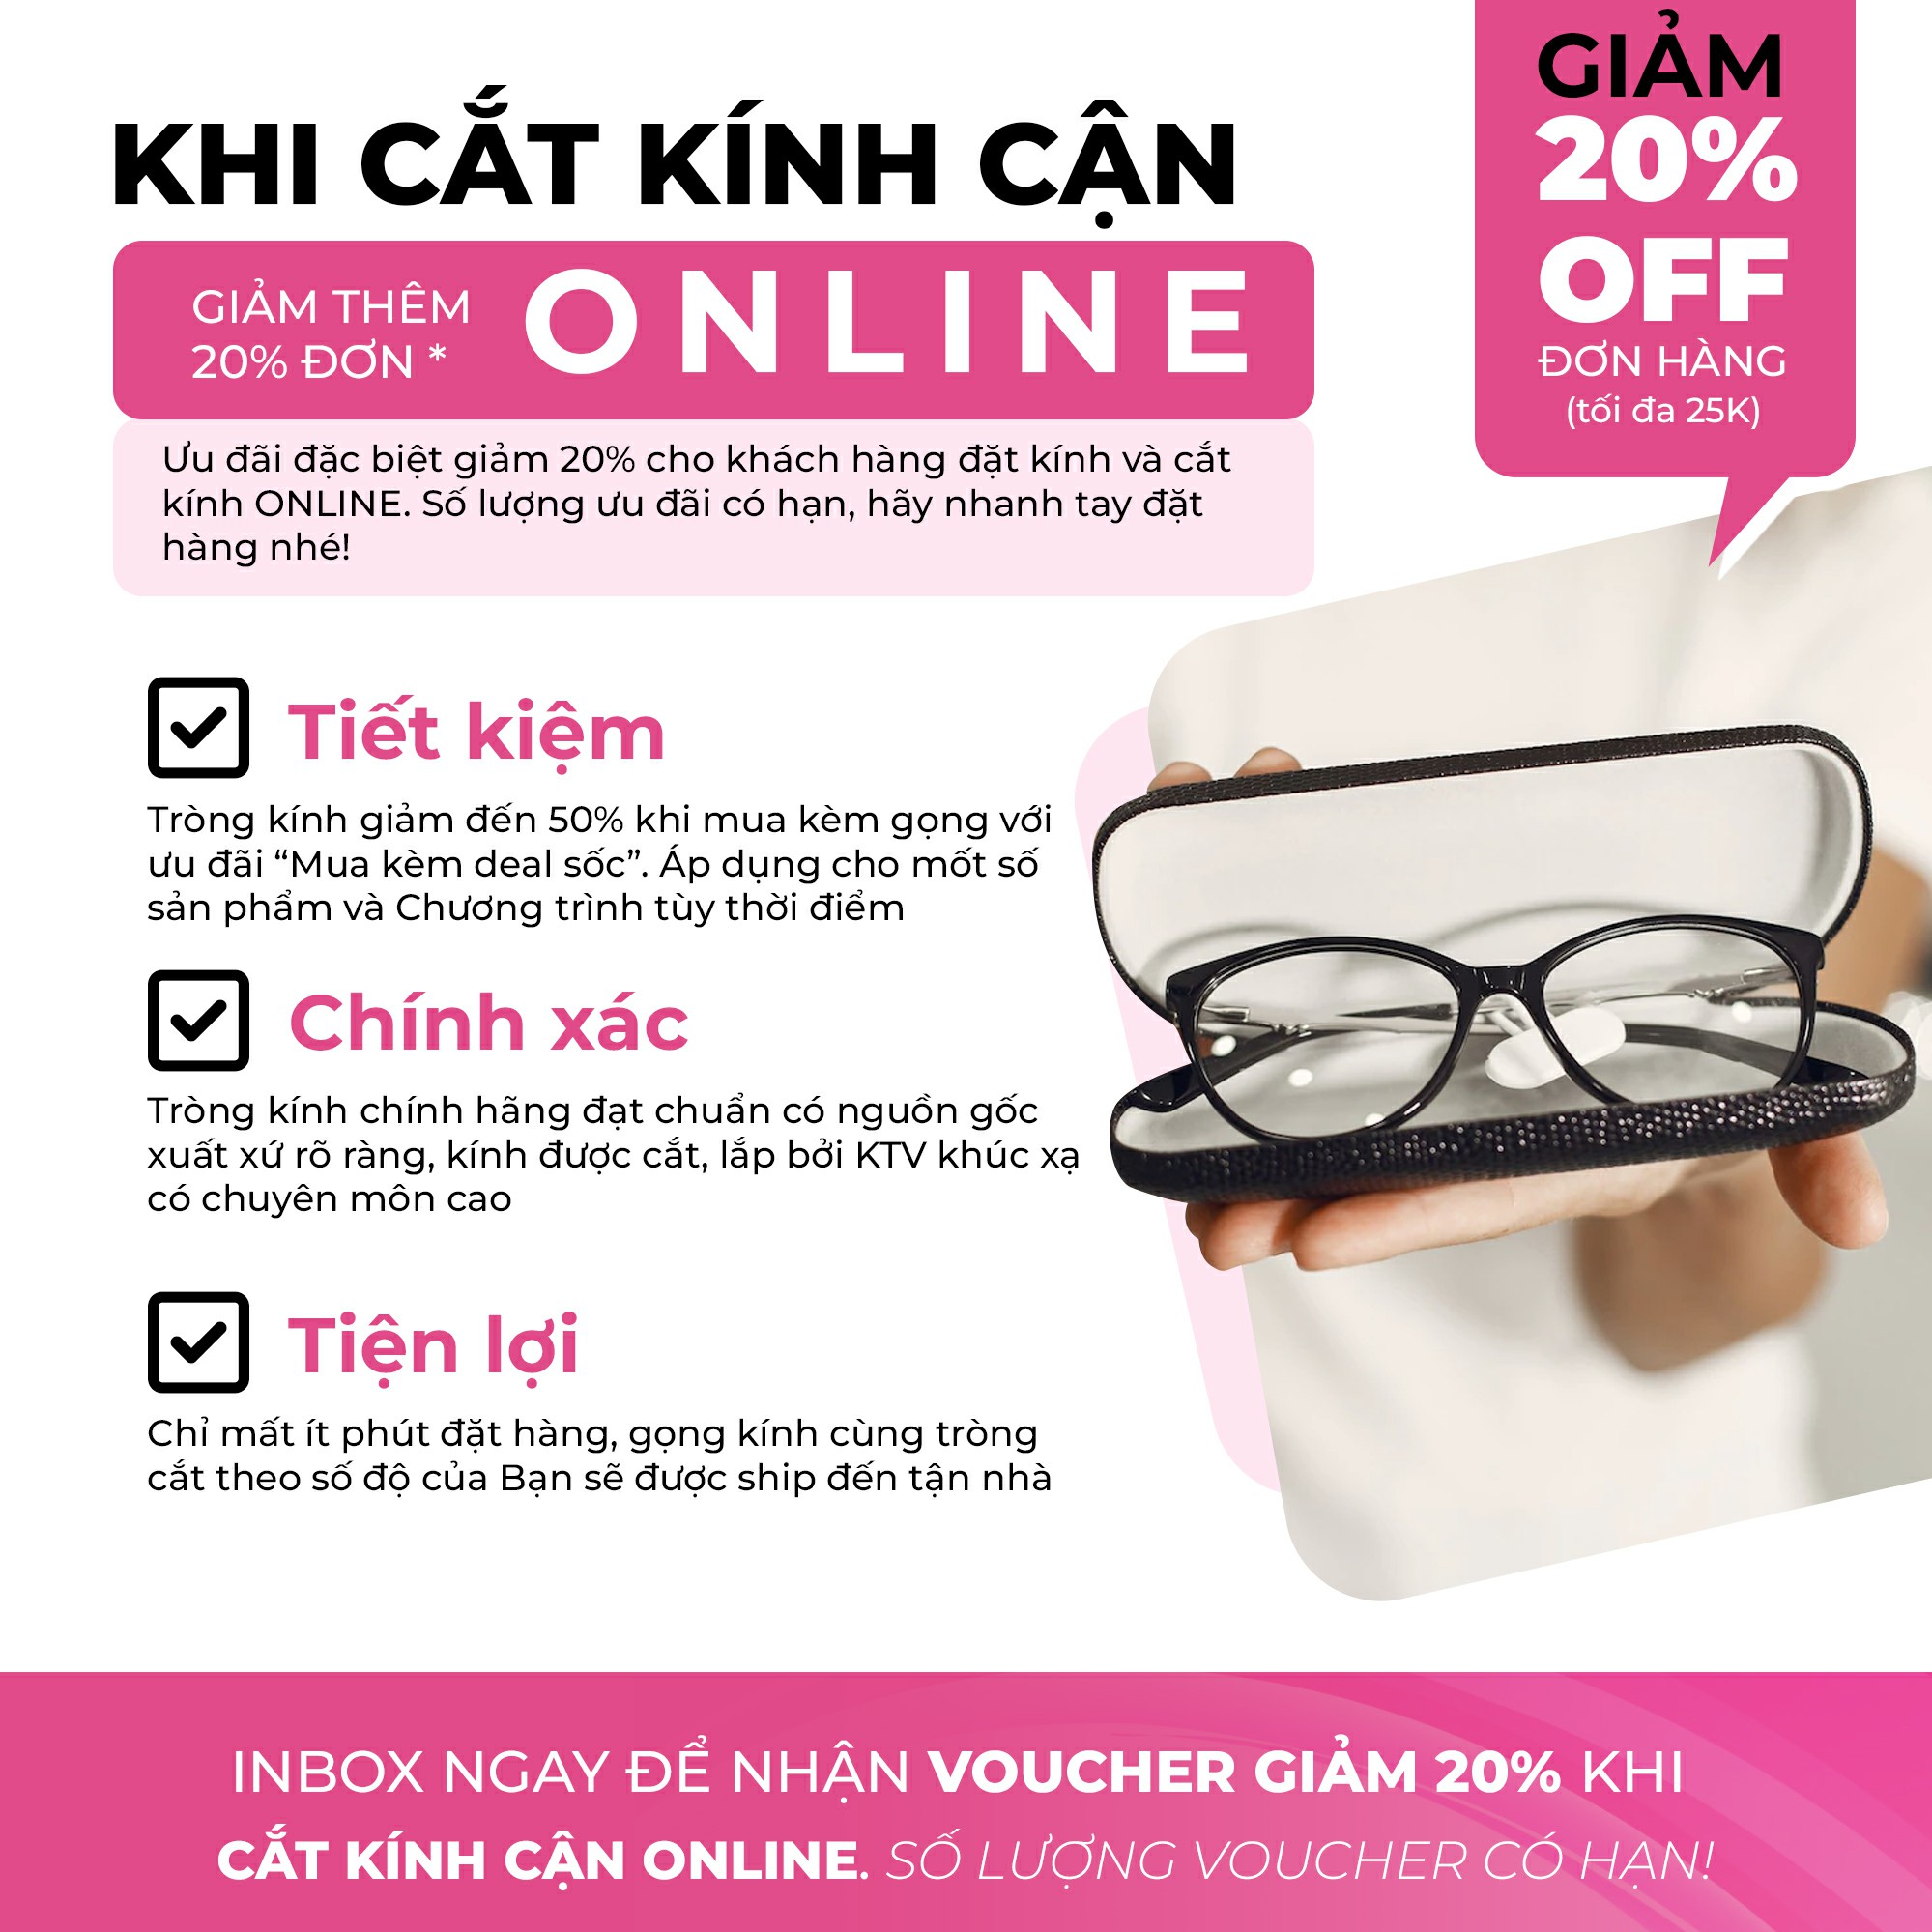 gong-kinh-ouress-cat-kinh-online-1210d80f-8d55-4c04-91bc-1830b5f0e5be.jpg?v=1673756231862